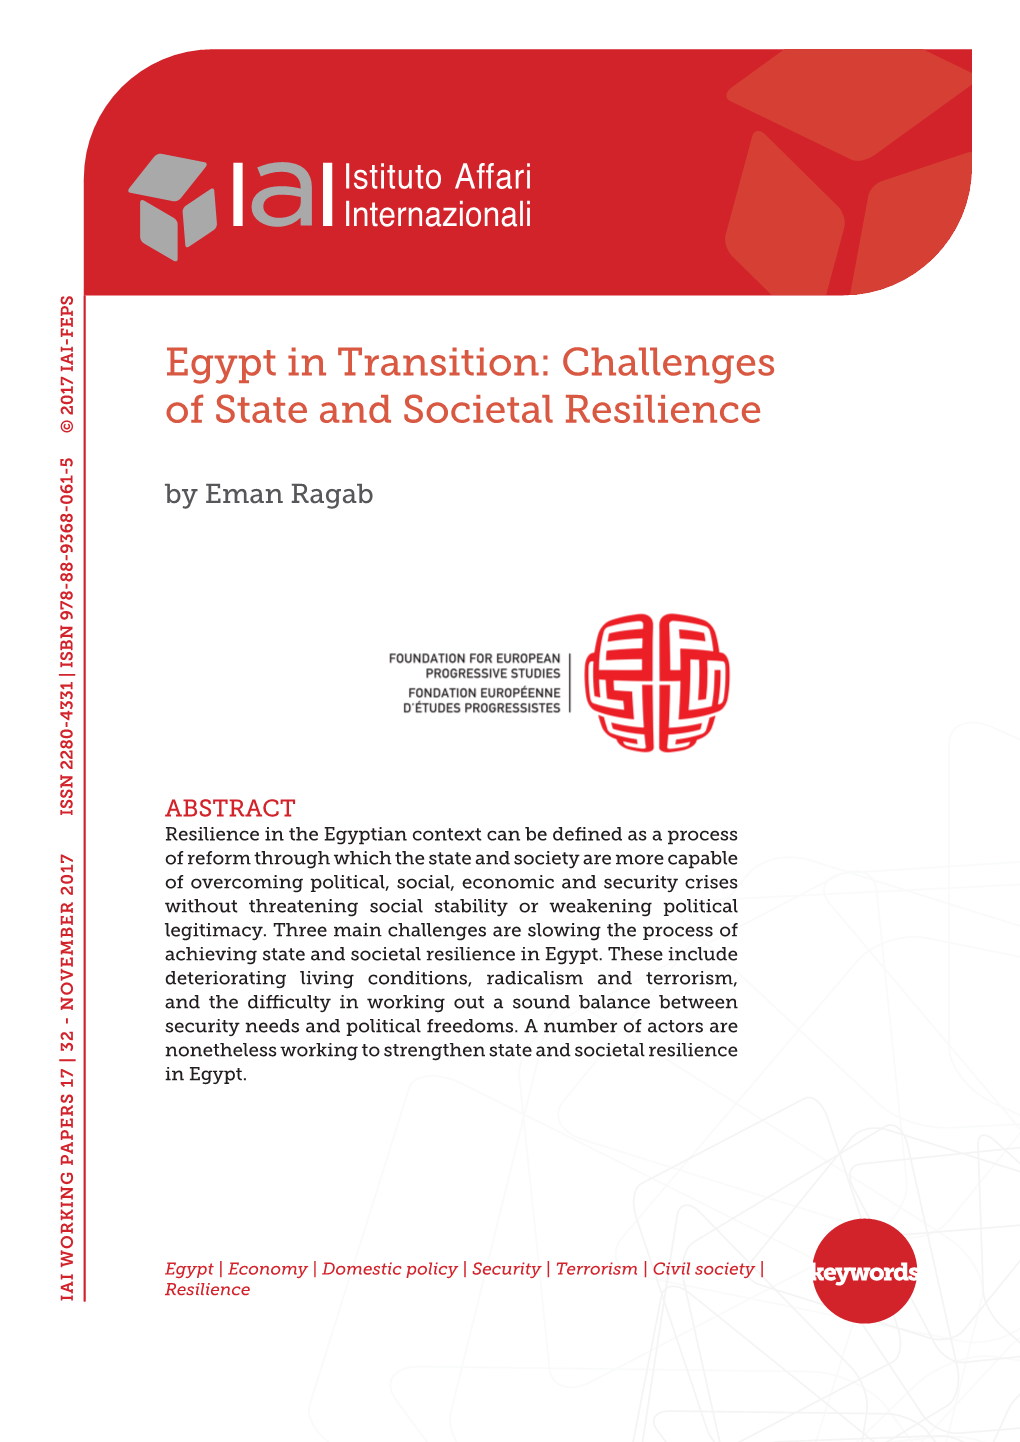 Egypt in Transition: Challenges of State and Societal Resilience